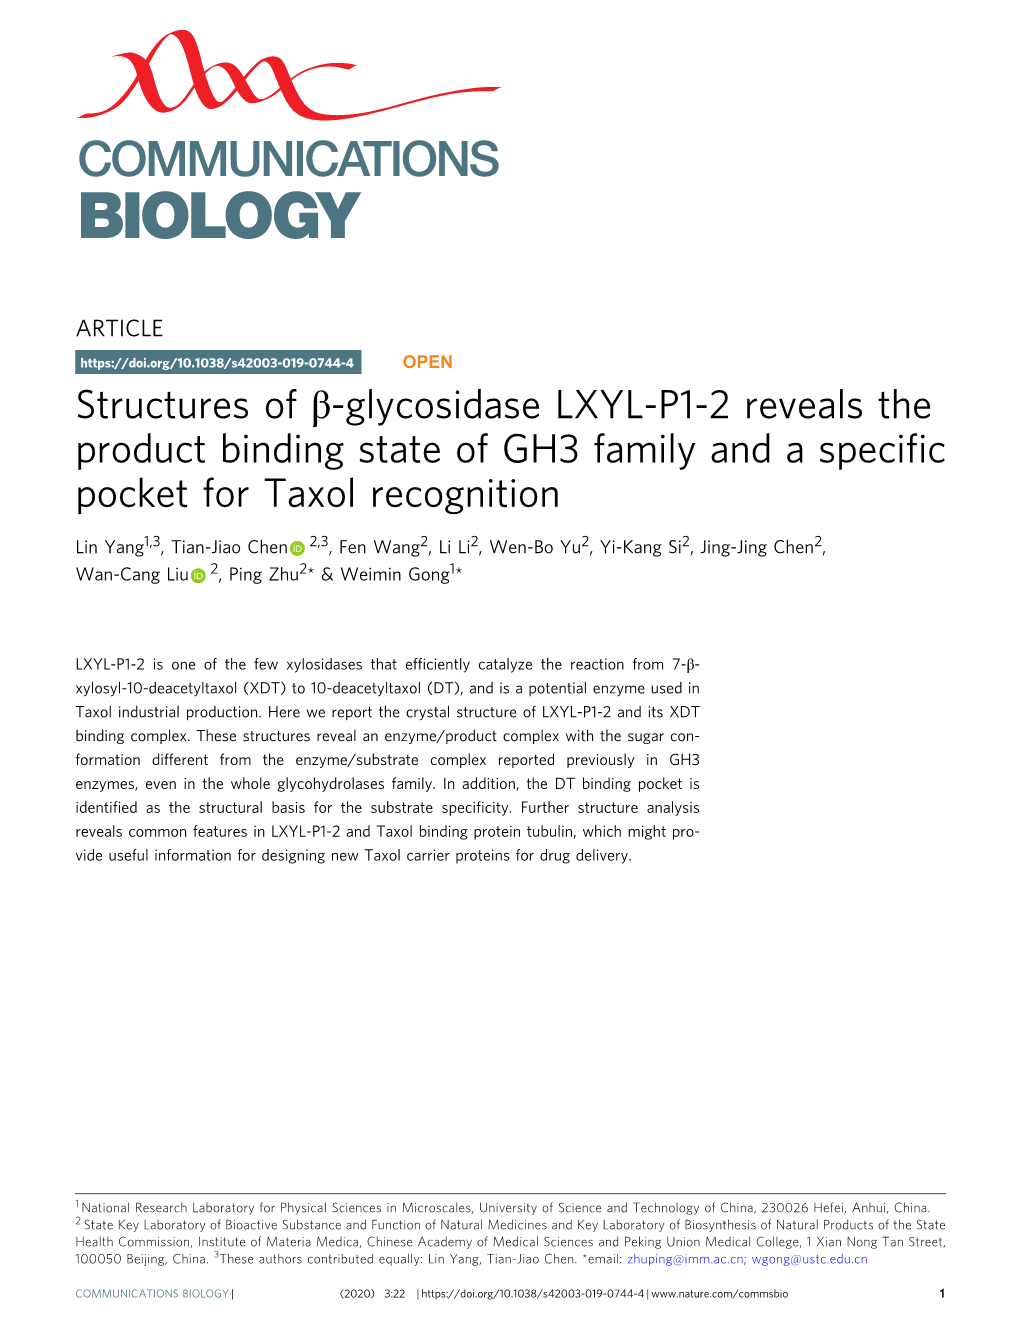 Structures of Î²-Glycosidase LXYL-P1-2 Reveals the Product